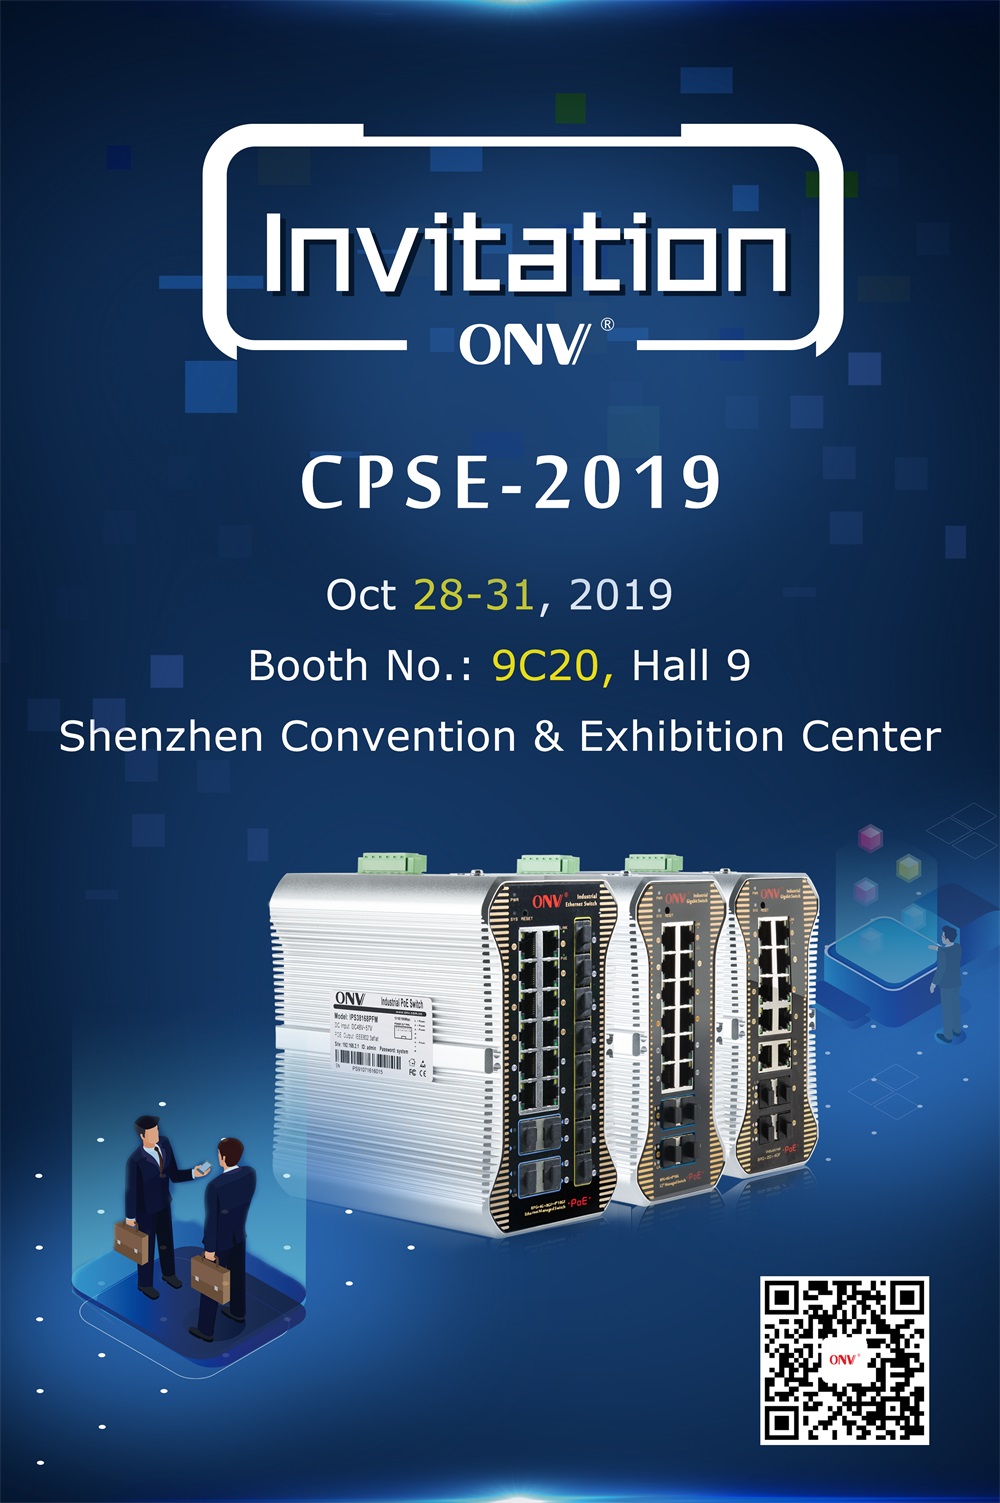 ONV PoE switch at Security China CPSE, PoE switch